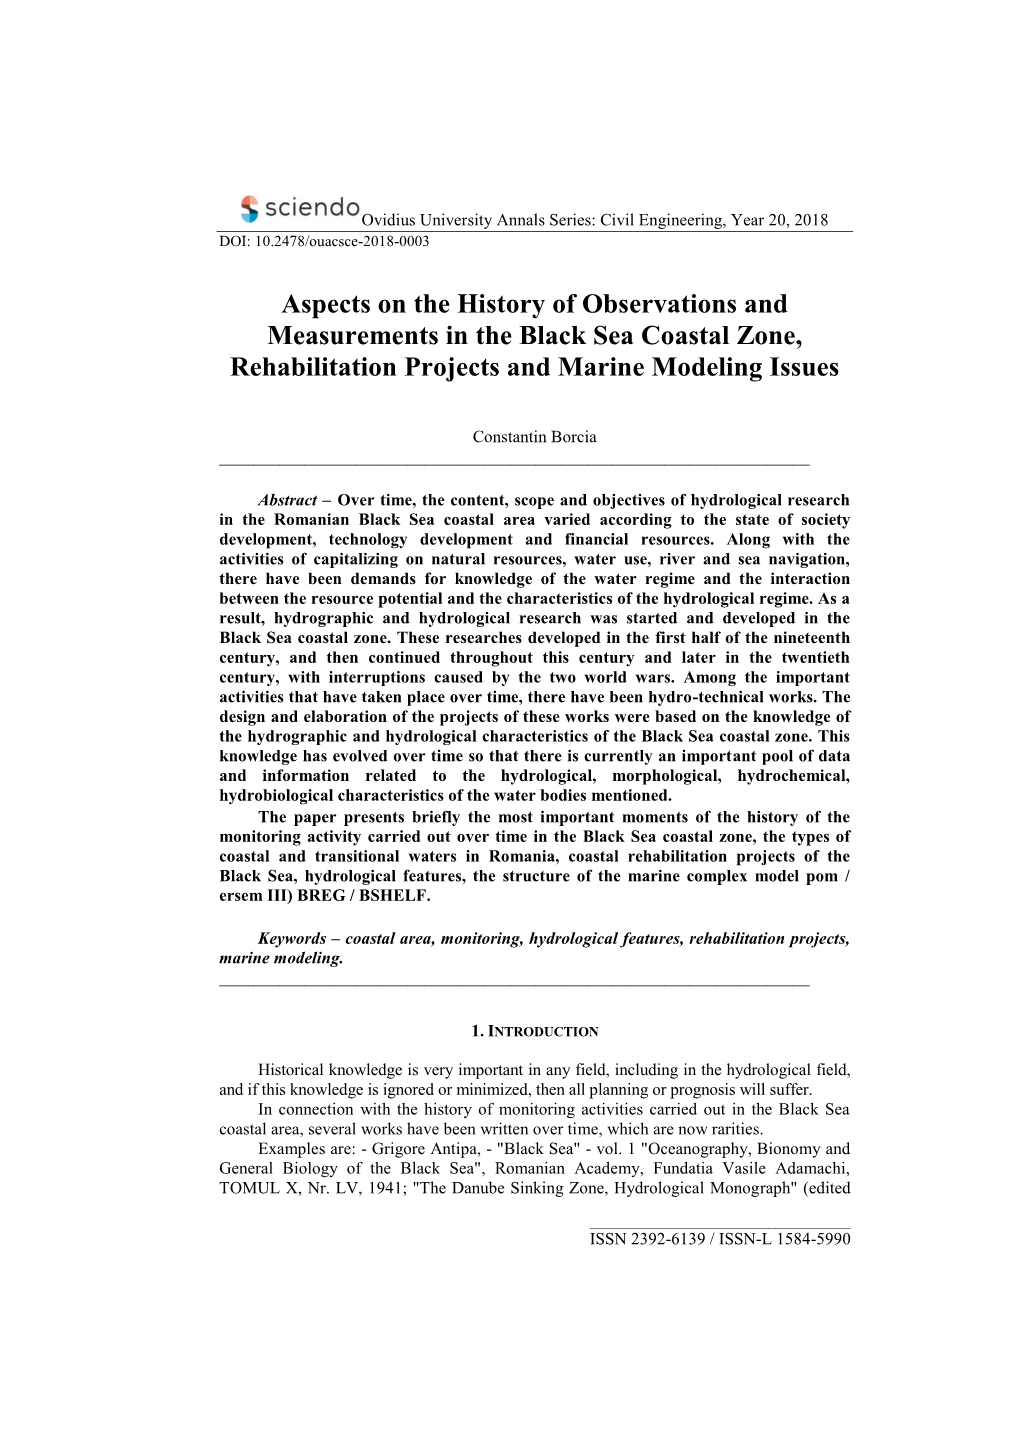 Aspects on the History of Observations and Measurements in the Black Sea Coastal Zone, Rehabilitation Projects and Marine Modeling Issues